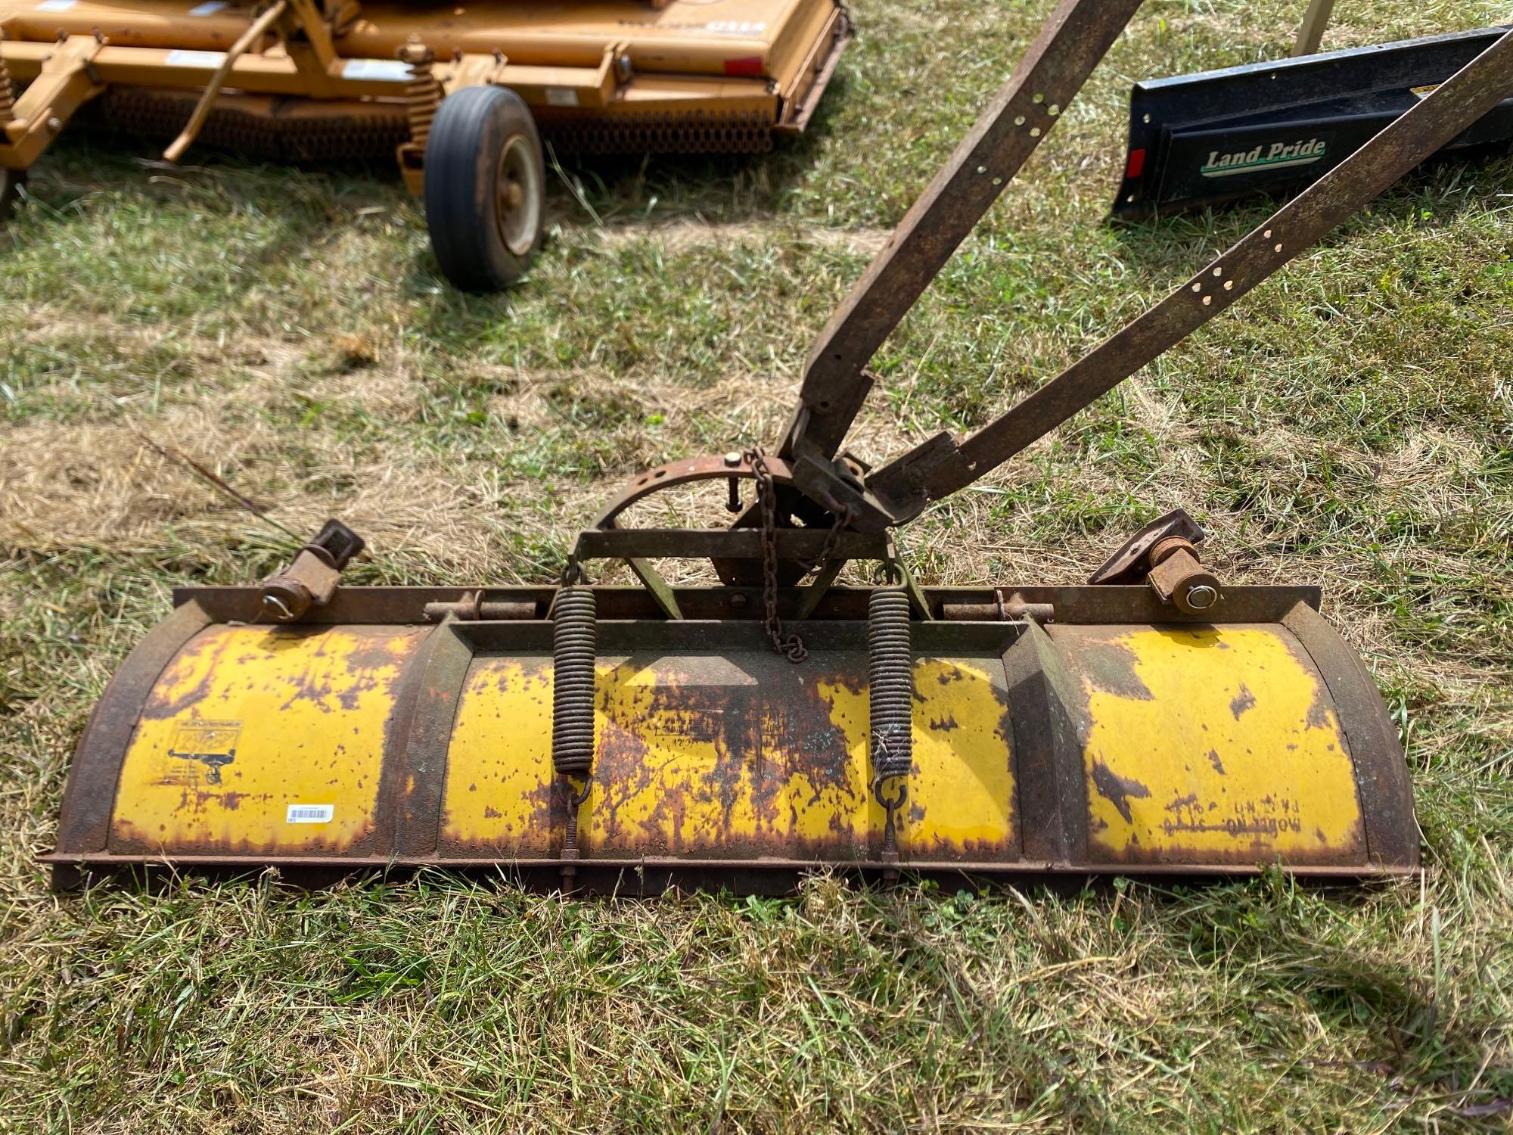 Image for Tractor Front Scraper Blade, no hydraulics w/ 8' Blade, like new skid shoes, per seller- manual move